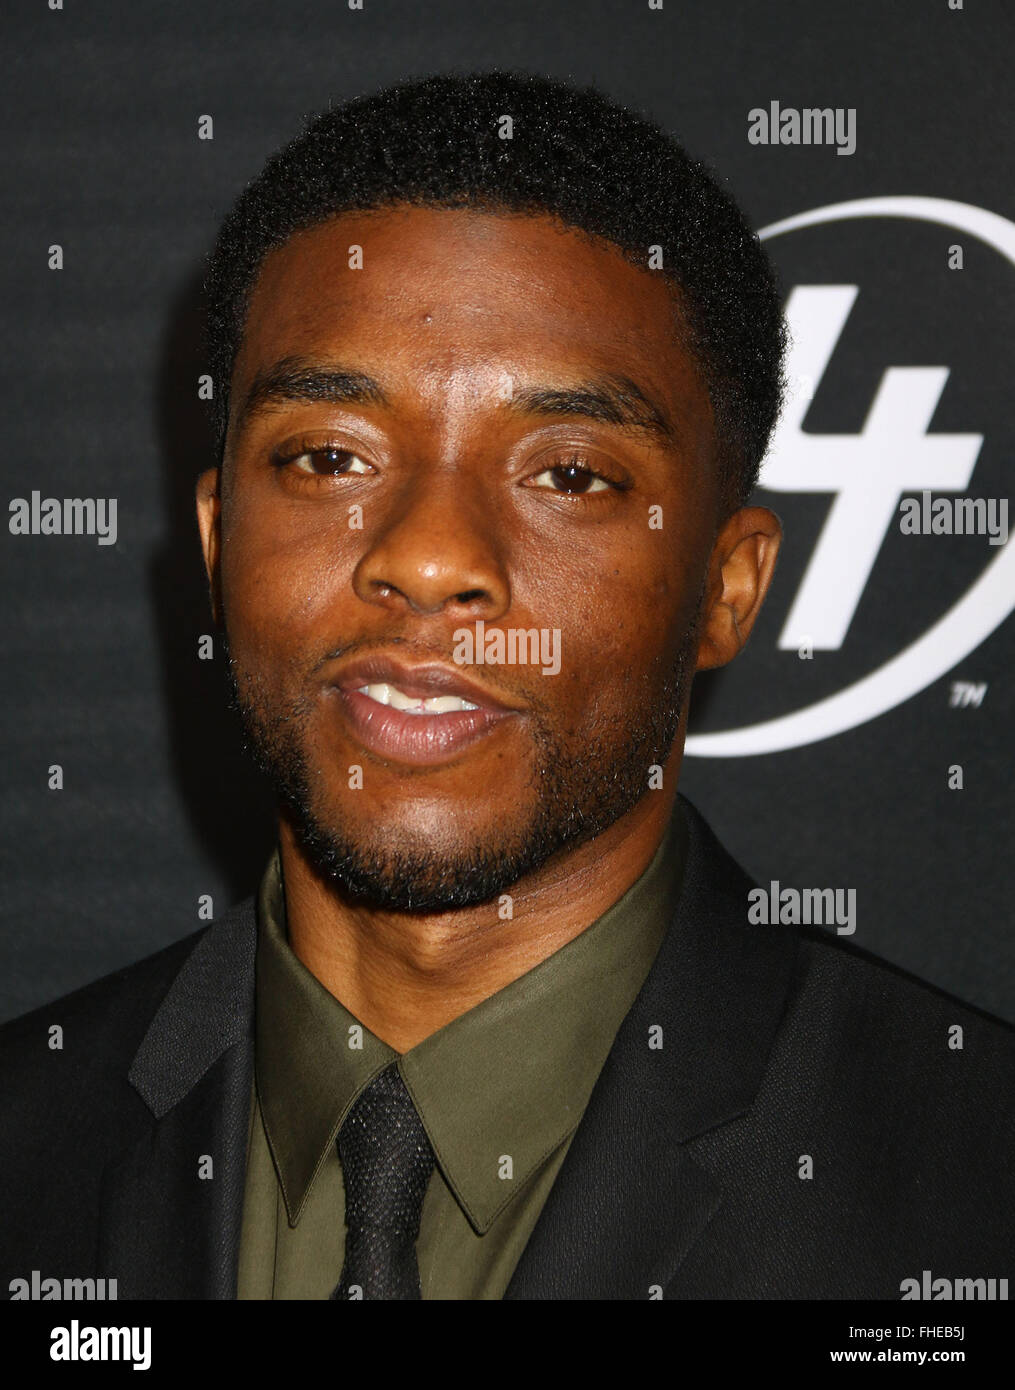 New York, USA. 24th Feb, 2016. Actor CHADWICK BOSEMAN attends the New York  premiere of 'Gods